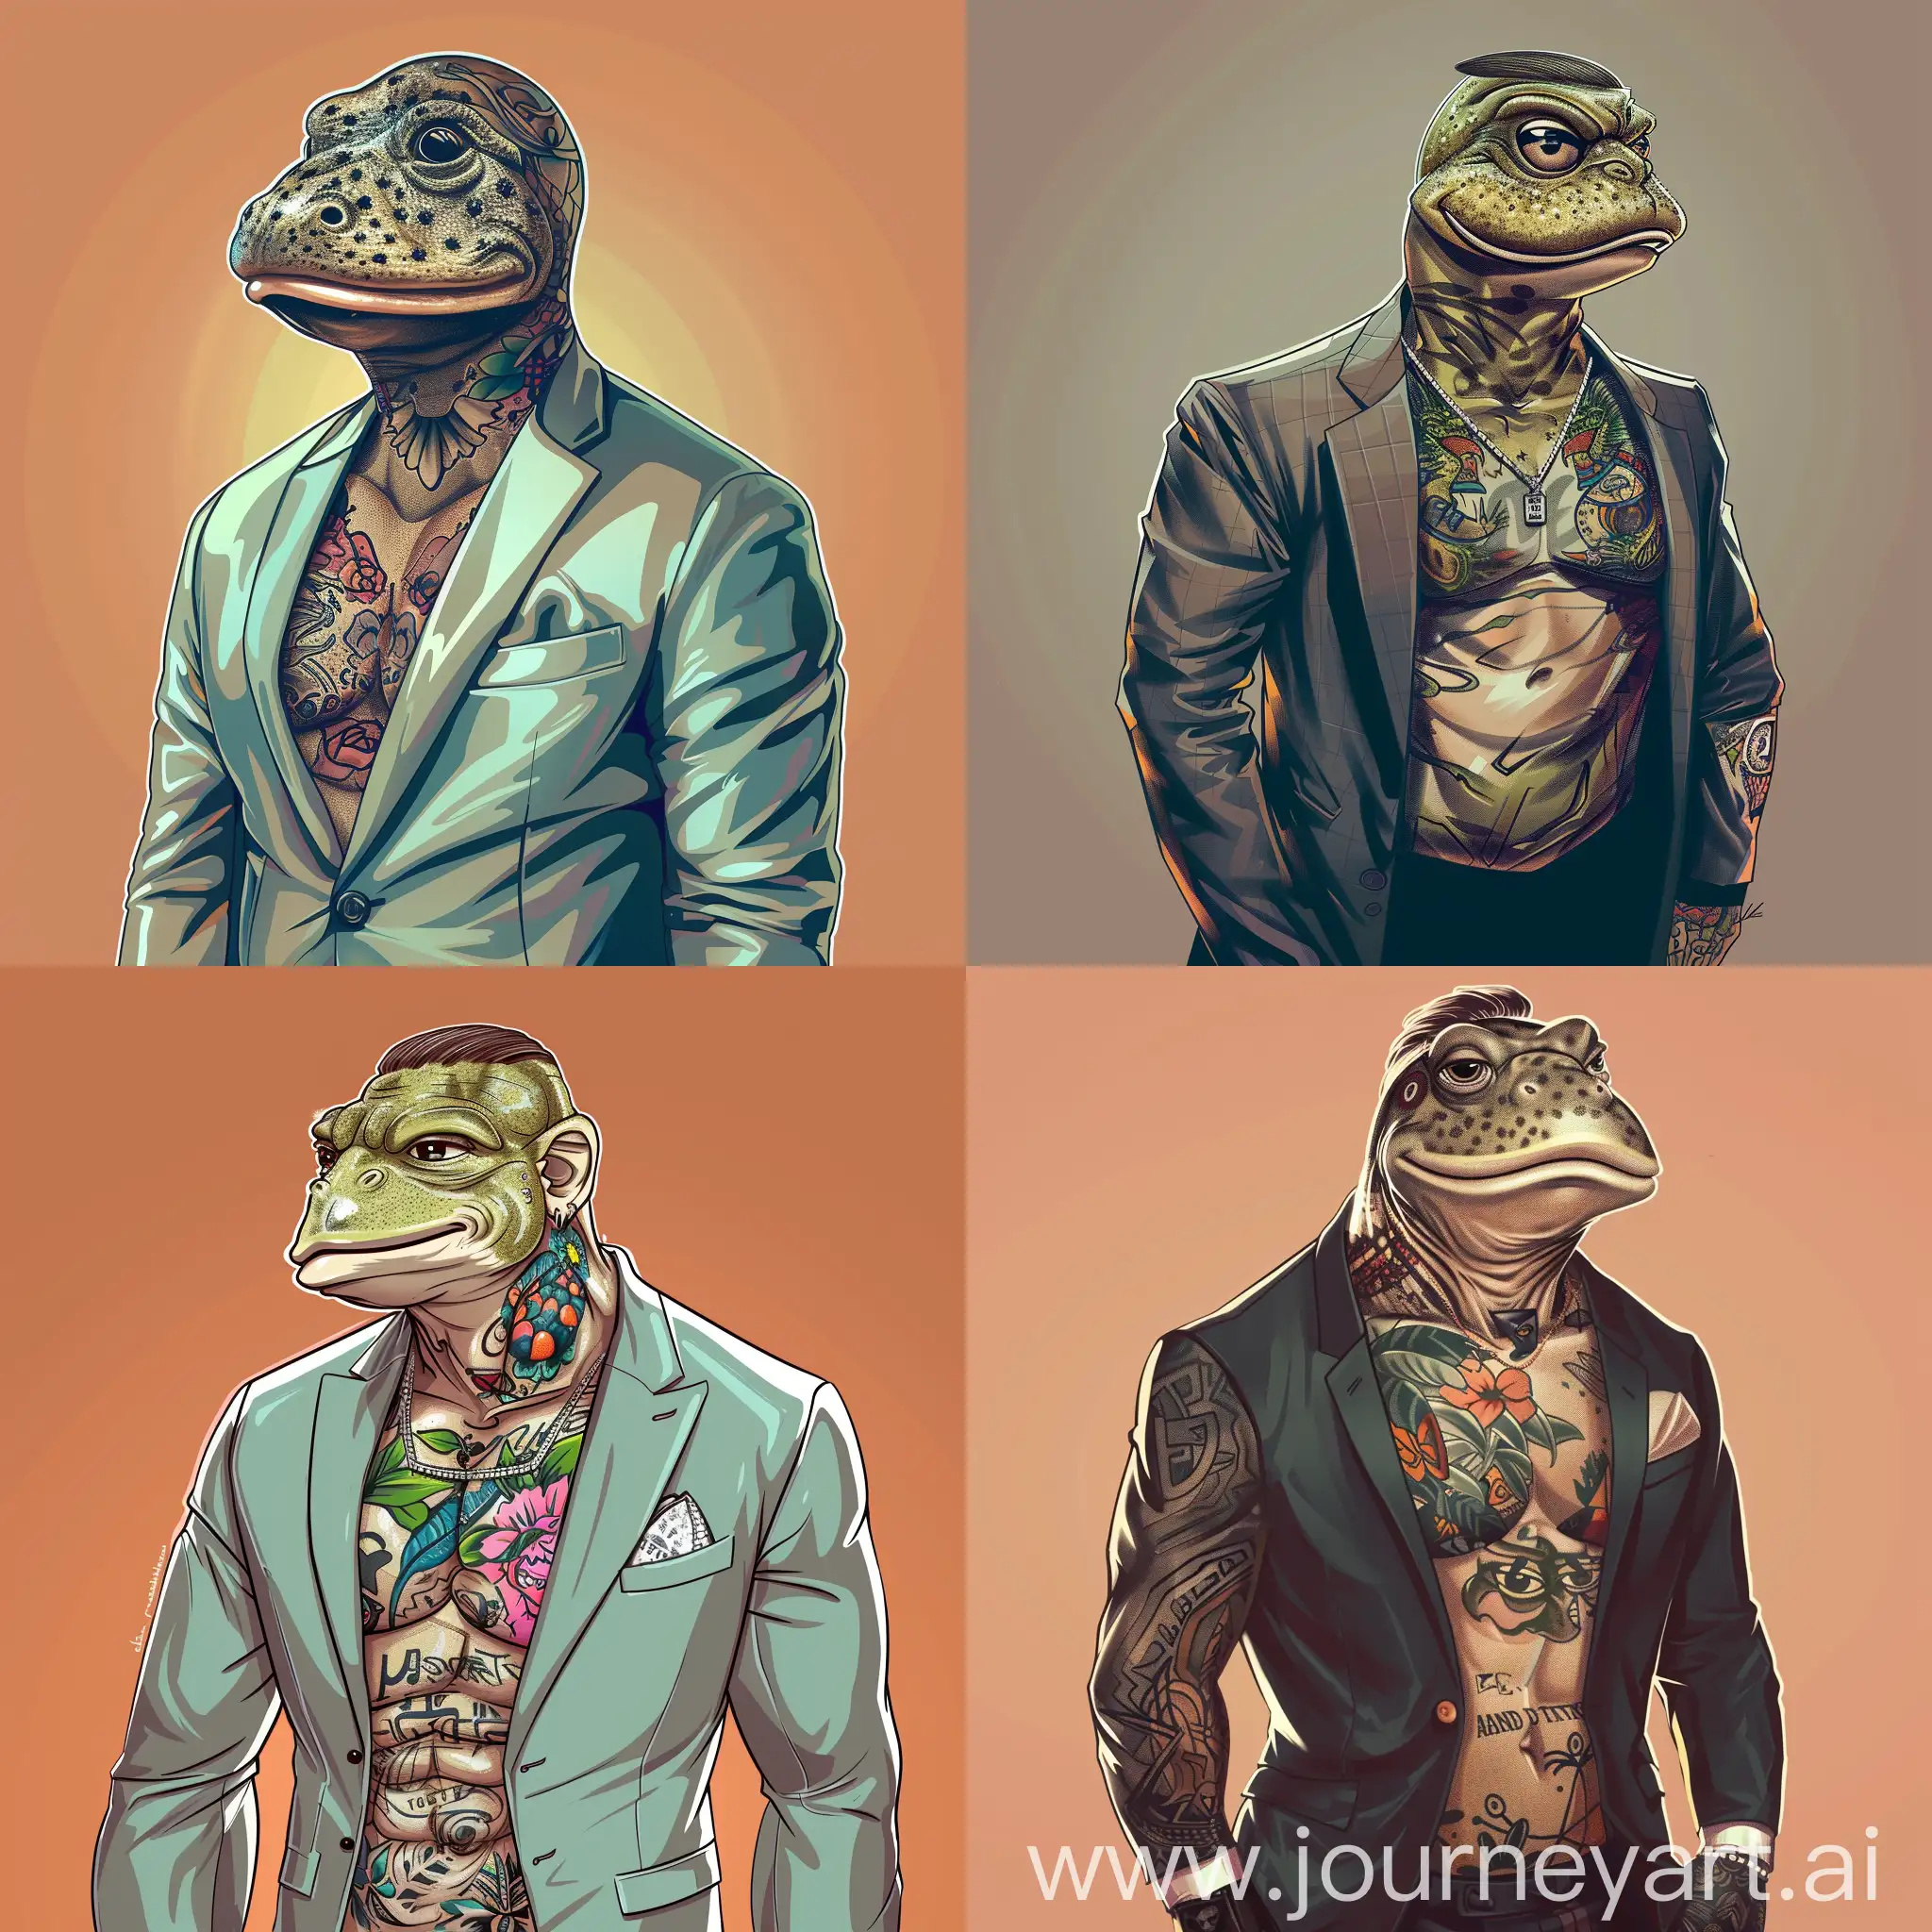 Create an illustration of the famous meme character Pepe the Frog dressed as Andrew Tate. Include key features such as:
- A muscular build similar to Andrew Tate's physique.
- Wearing fashionable clothing, like a stylish suit or casual but trendy outfit.
- Facial expression showing confidence and determination.
- Include details like tattoos if possible.
- Background can be simple, highlighting Pepe's new persona.

Art style: Realistic with a touch of cartoonish charm.
Color scheme: Vibrant and eye-catching